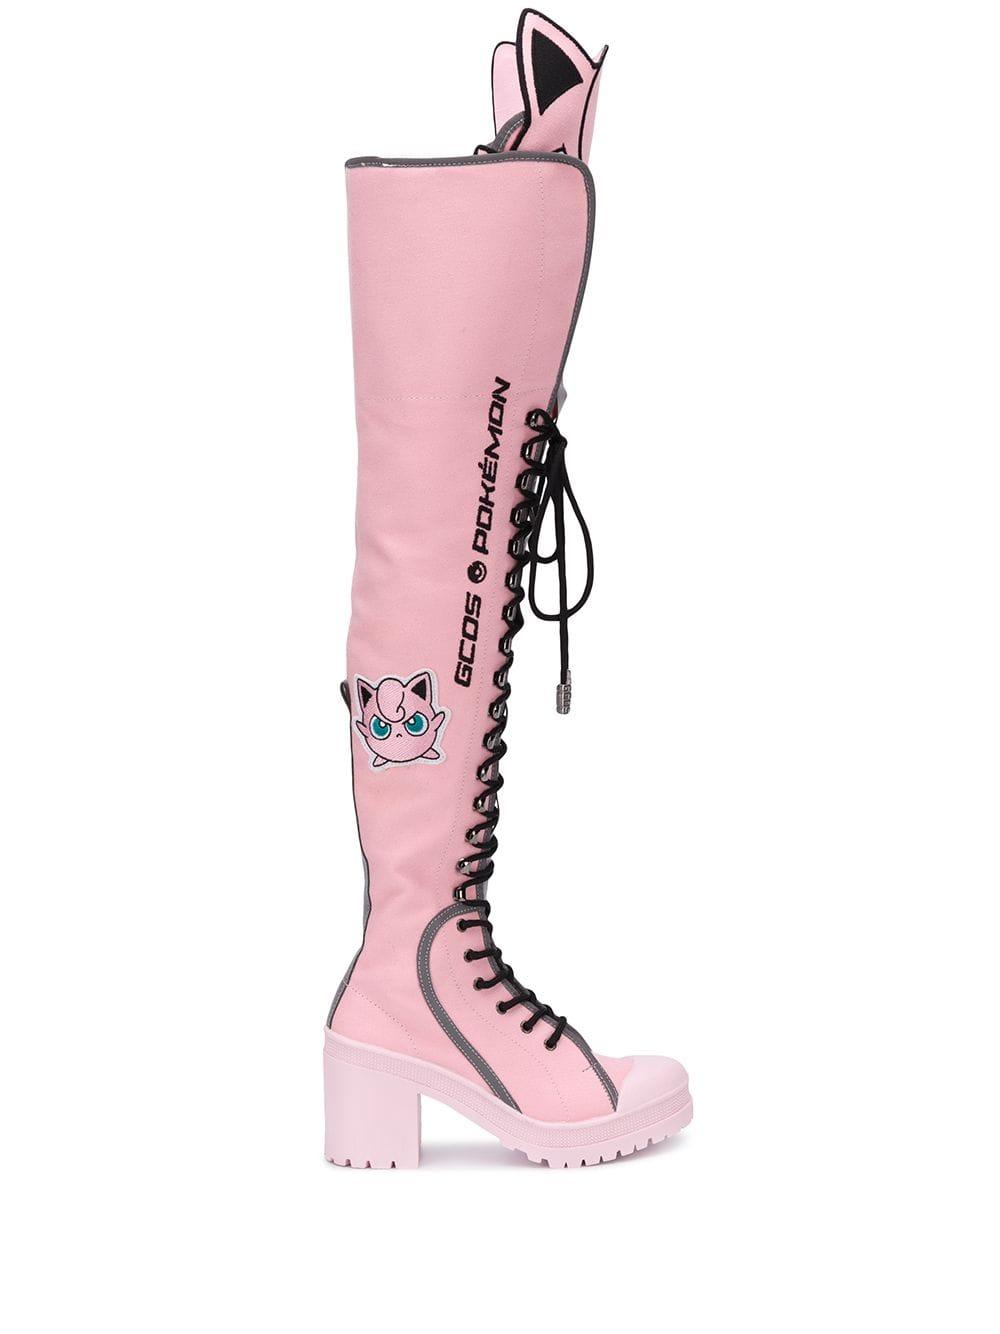 Gcds Pokémon Themed Knee-high Boots in Pink | Lyst